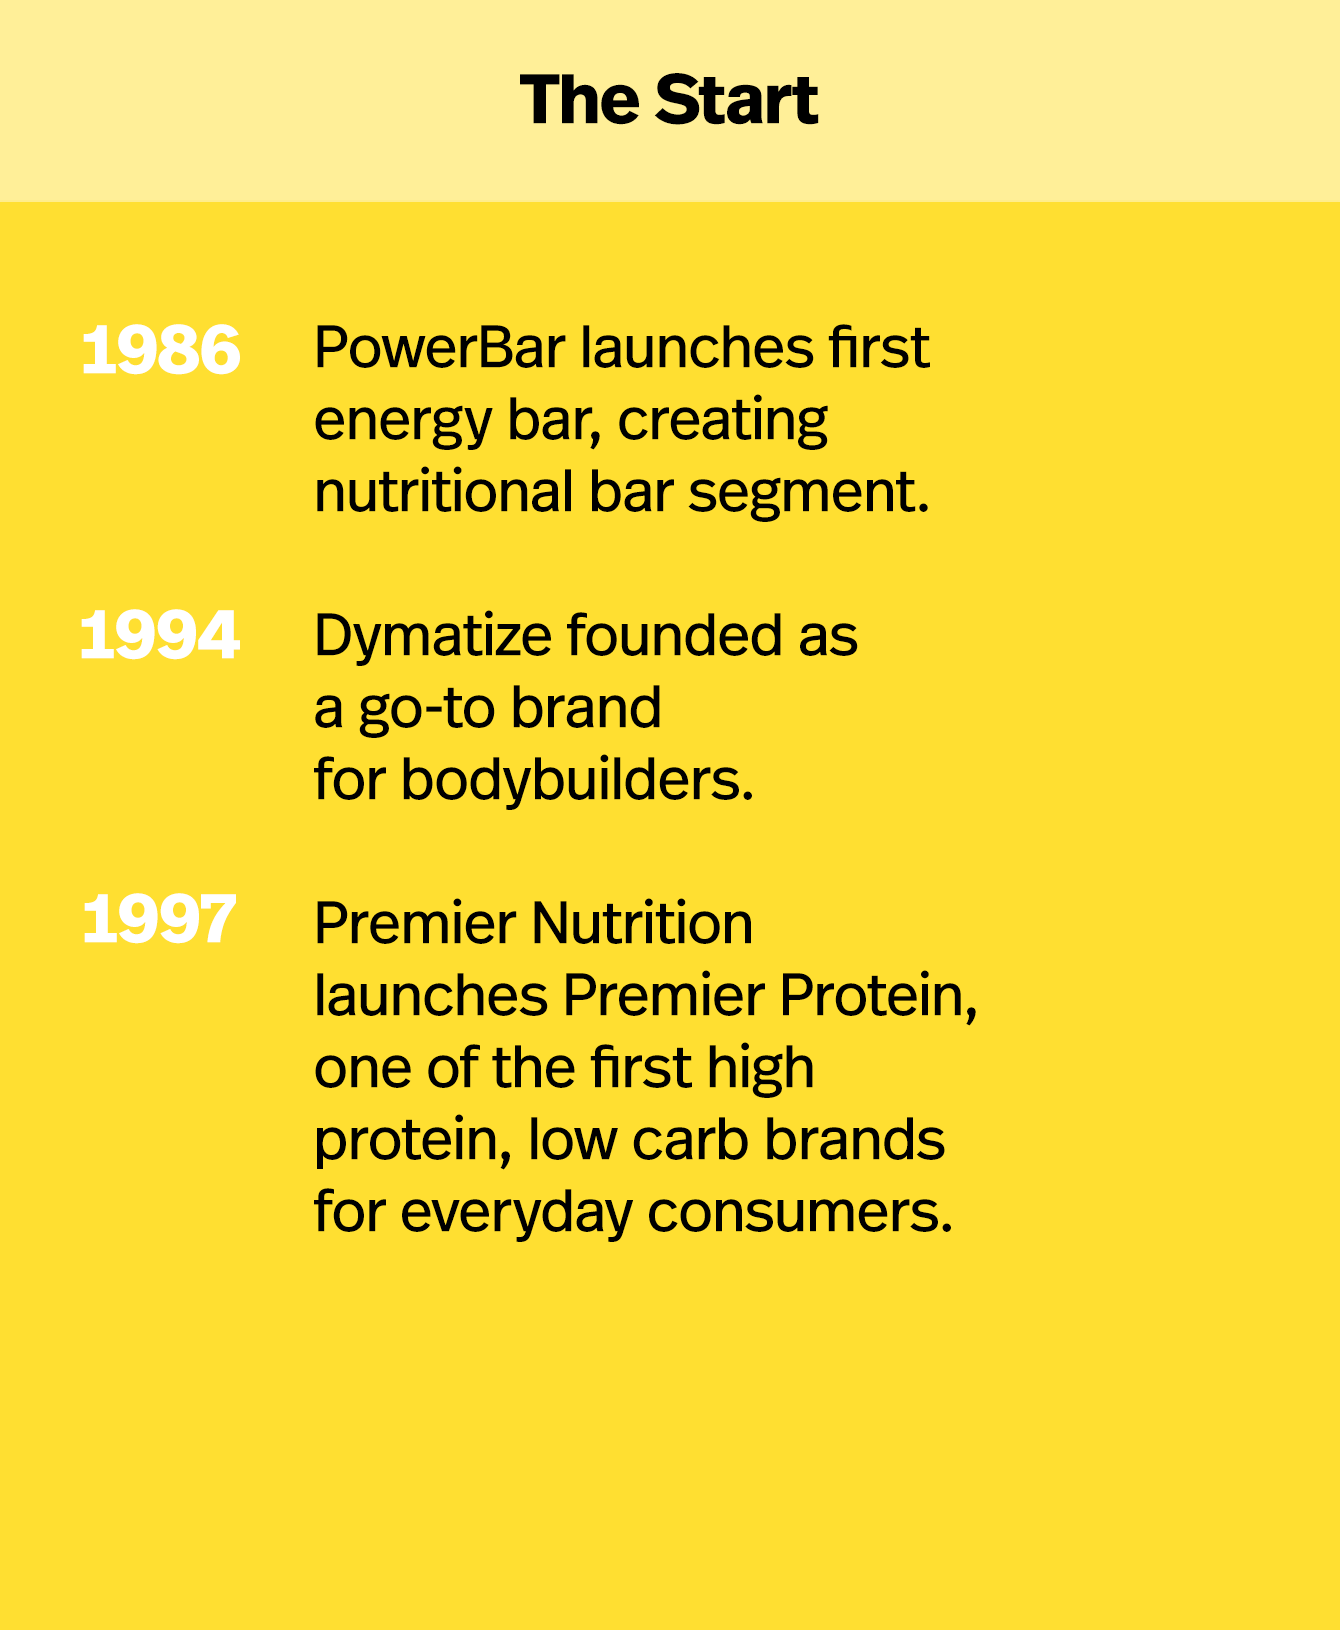 1986: PowerBar launches first energy bar, creating nutritional bar segment. 1994: Dymatize founded as a go-to brand for bodybuilders. 1997: Premier Nutrition launches Premier Protein, one of the first high protein shakes for everyday consumers.